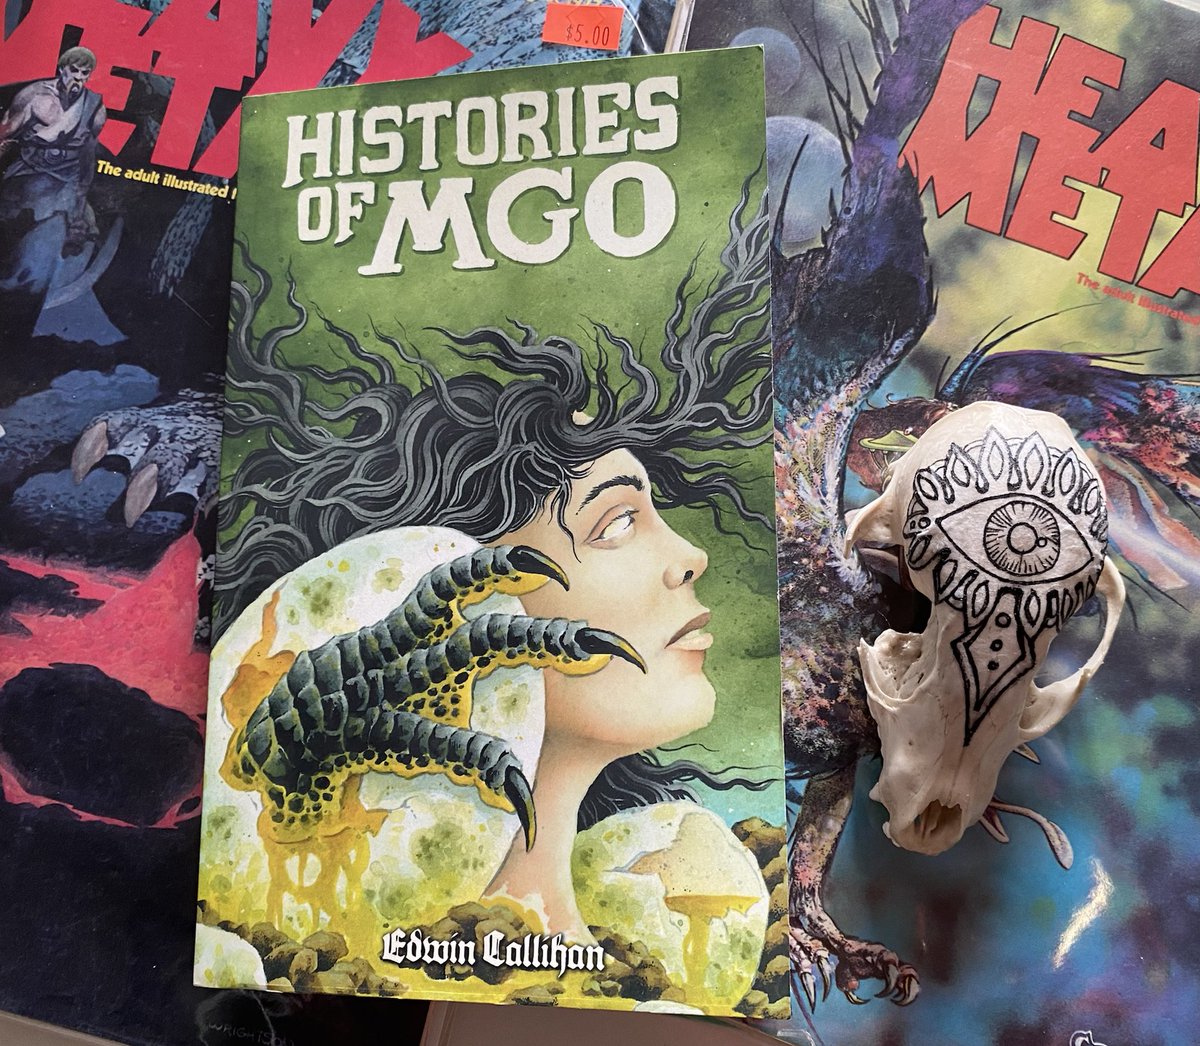 Finished Edwin Callihan’s HISTORIES OF MGO, one of my most anticipated books of the year, last night. 
Feels like a heavy metal album come to life, with weird fiction in all of its variations: contemporary cosmic horror, surreal dystopian futurescapes, pitch-black sword&sorcery.